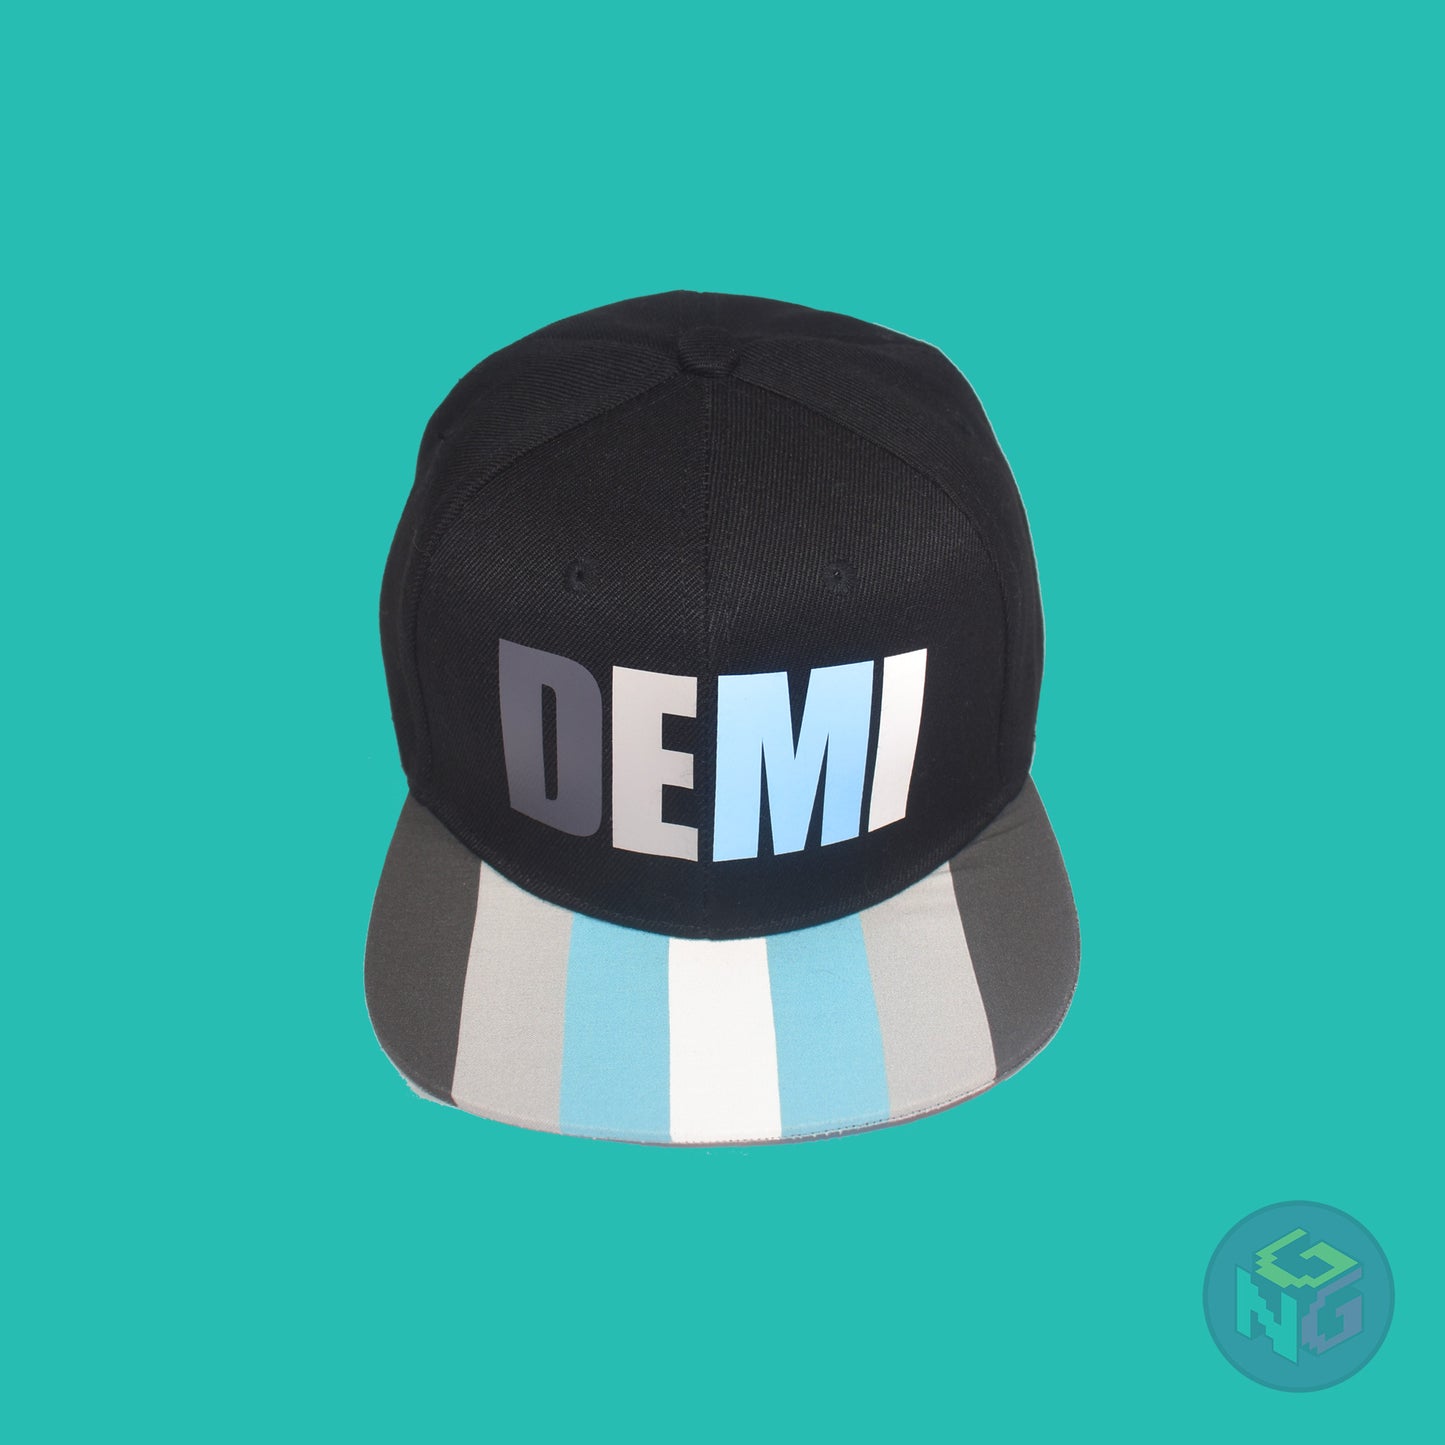 Black flat bill snapback hat. The brim has the demiboy pride flag on both sides and the front of the hat has the word “DEMI” in dark grey, light grey, blue, and white. Front top view